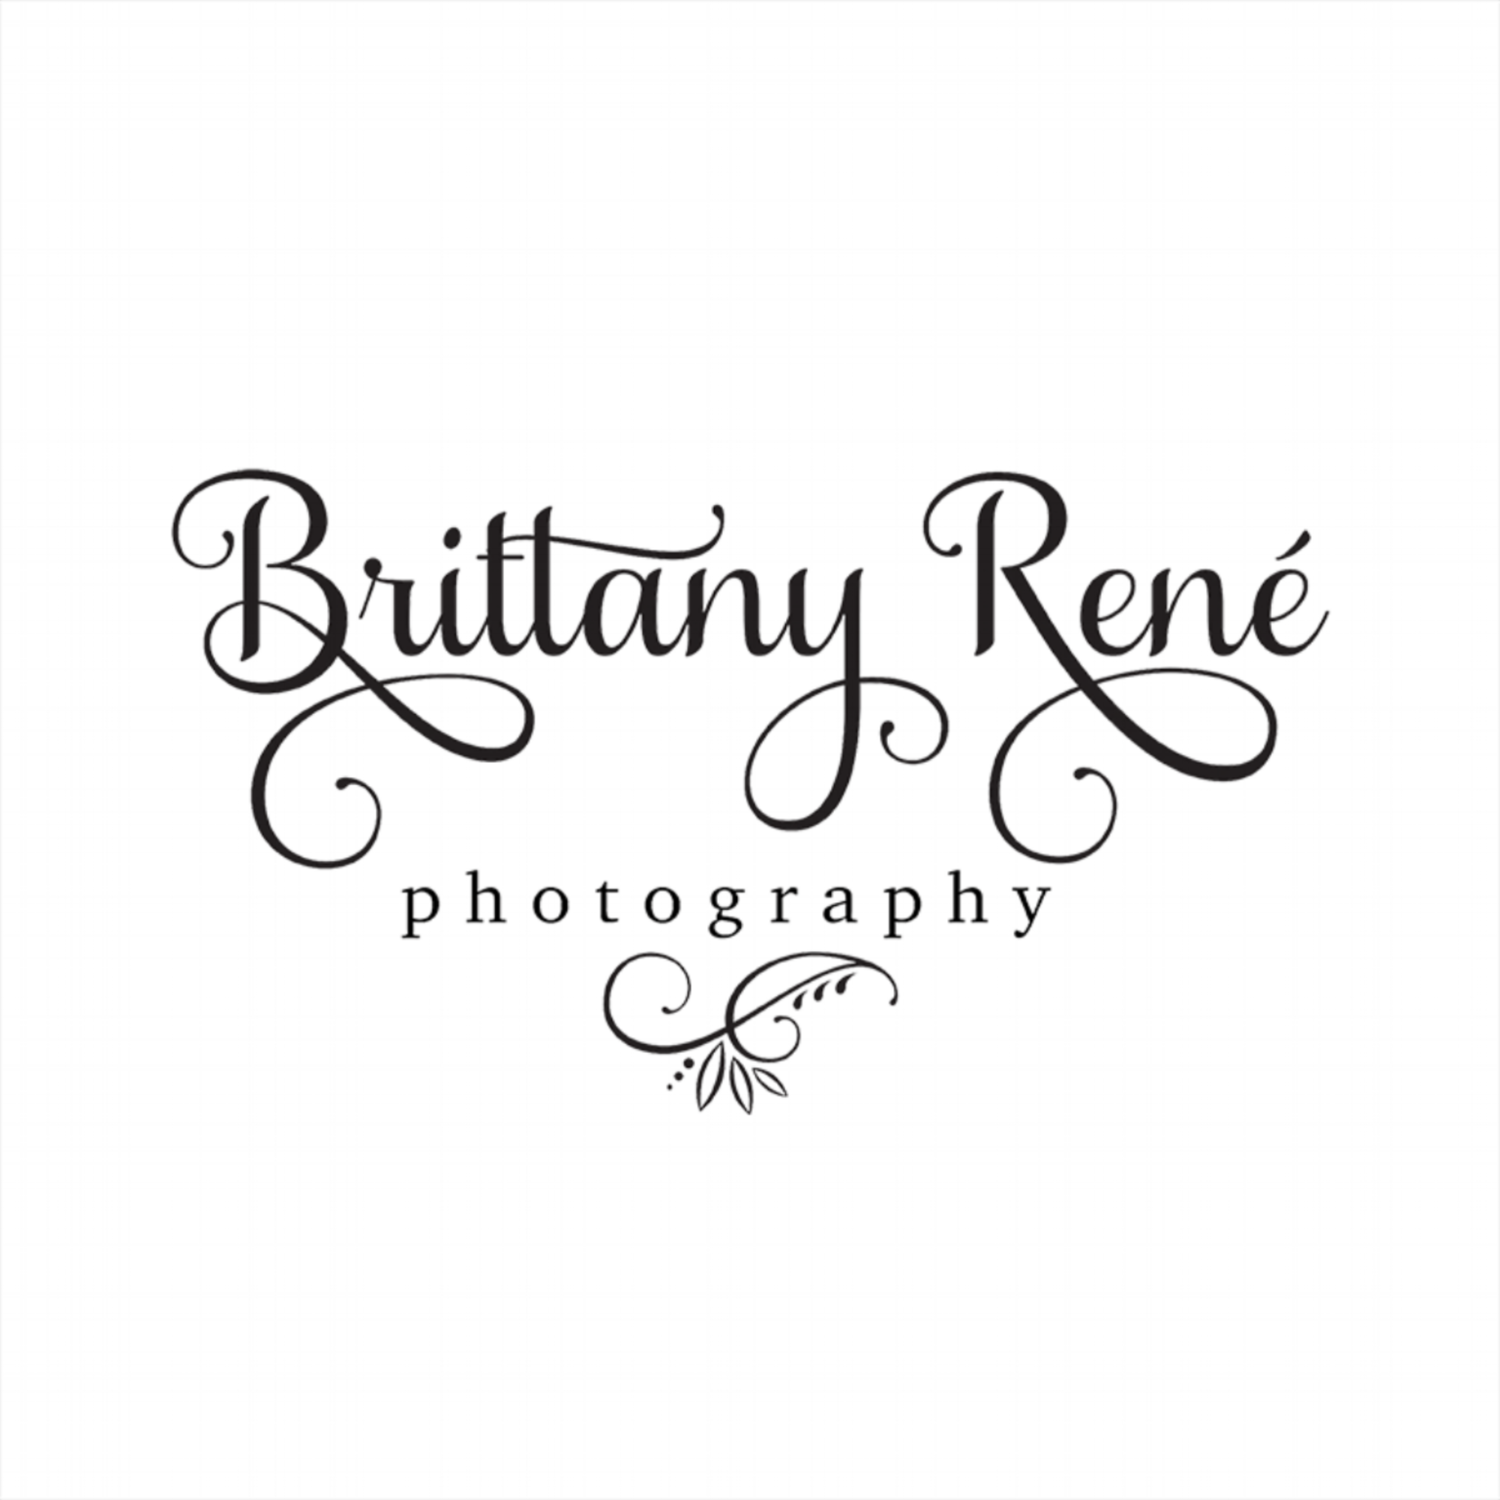 Brittany Rene´ Photography